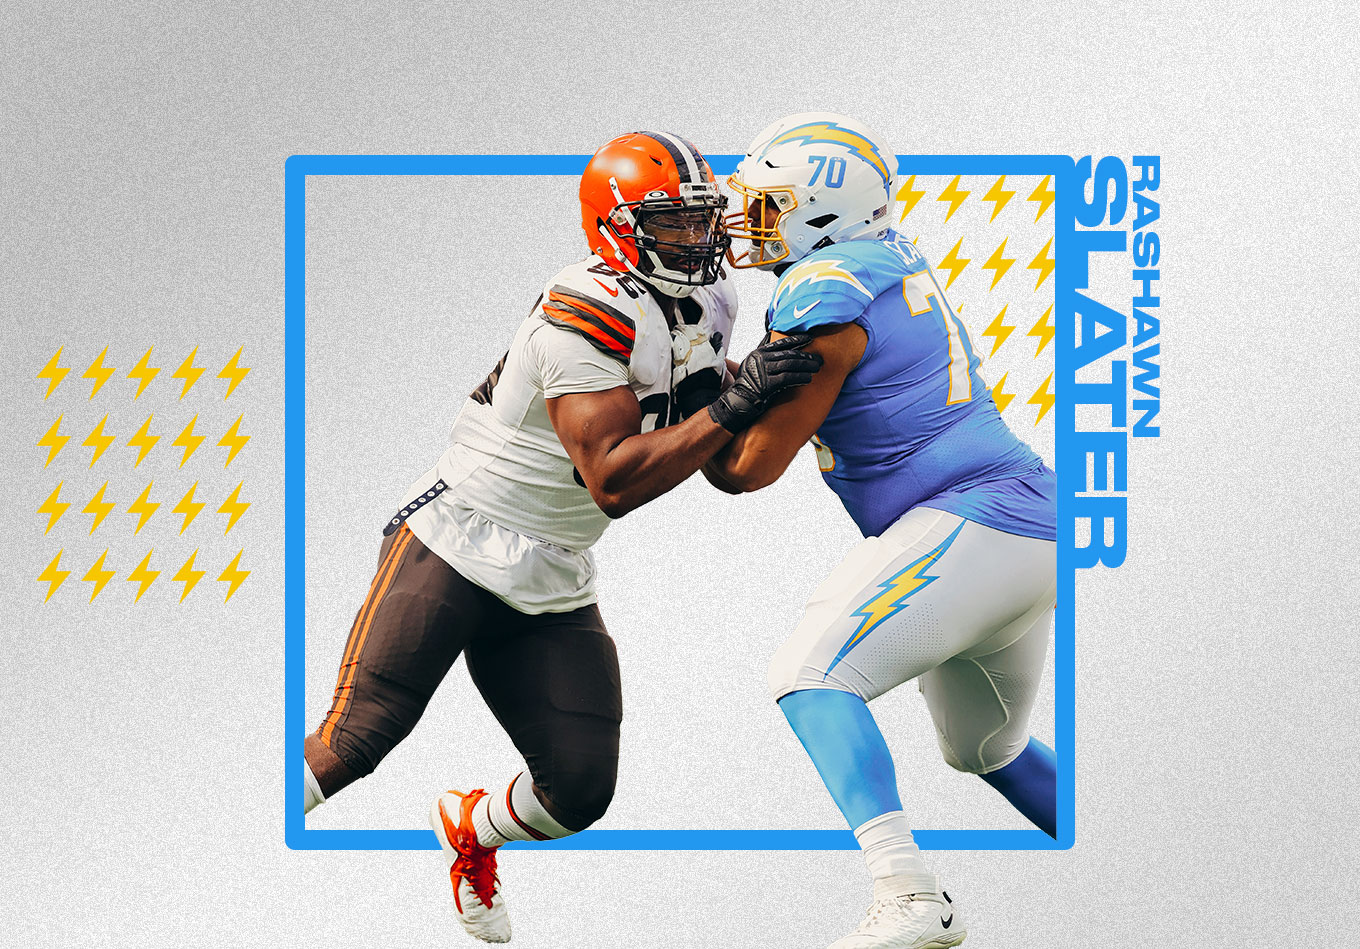 Can Rashawn Slater Win Offensive Rookie of the Year?